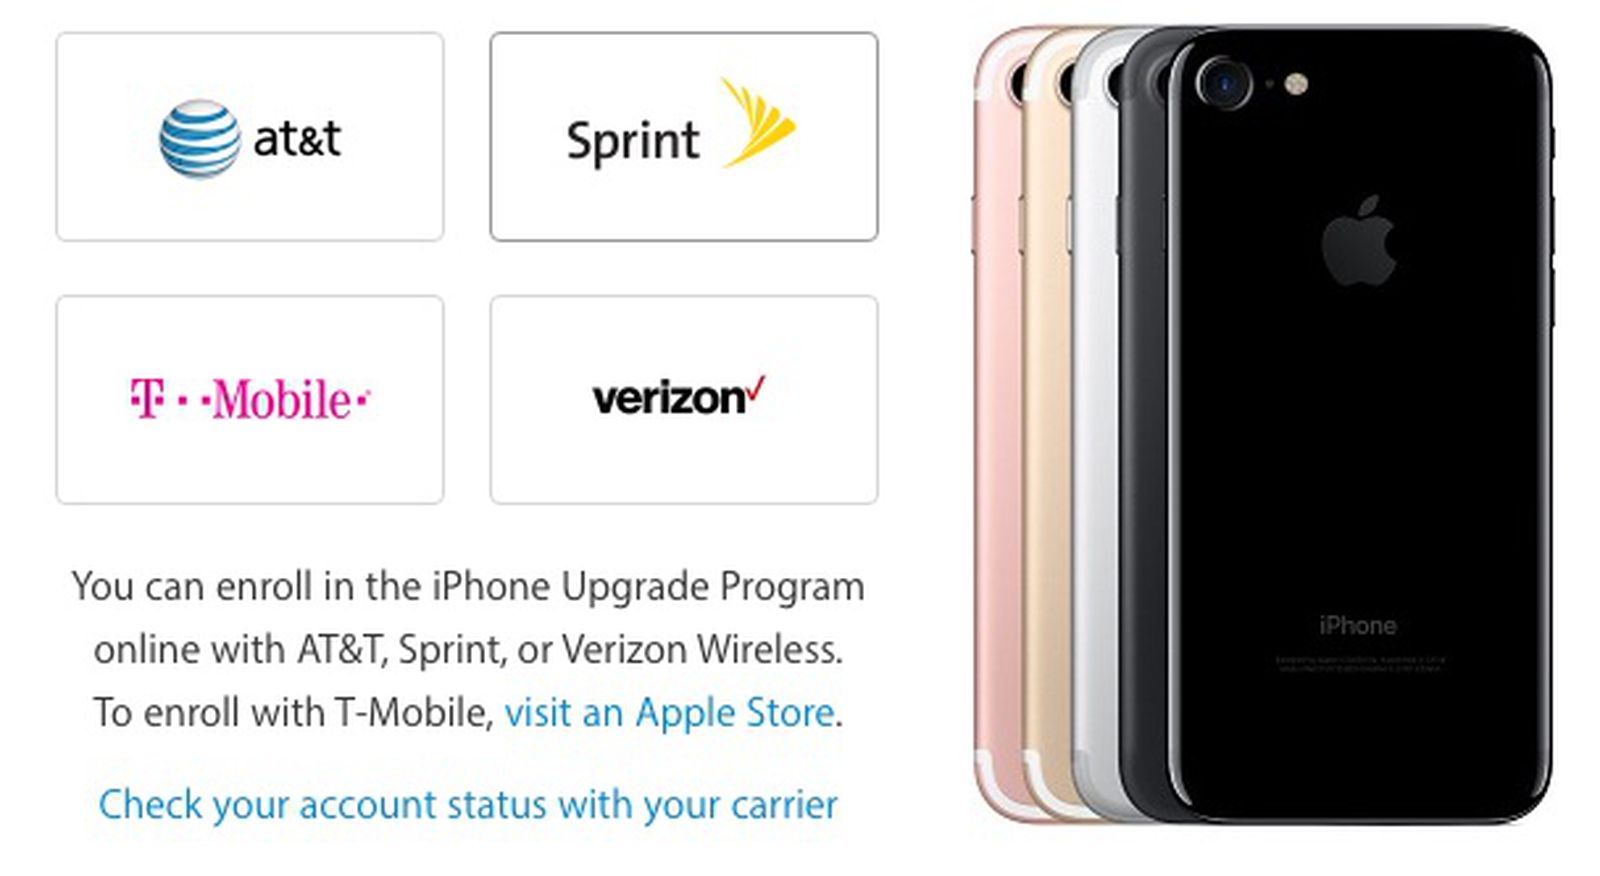 iPhone 7 Models From AT&T and T-Mobile Do Not Support CDMA 